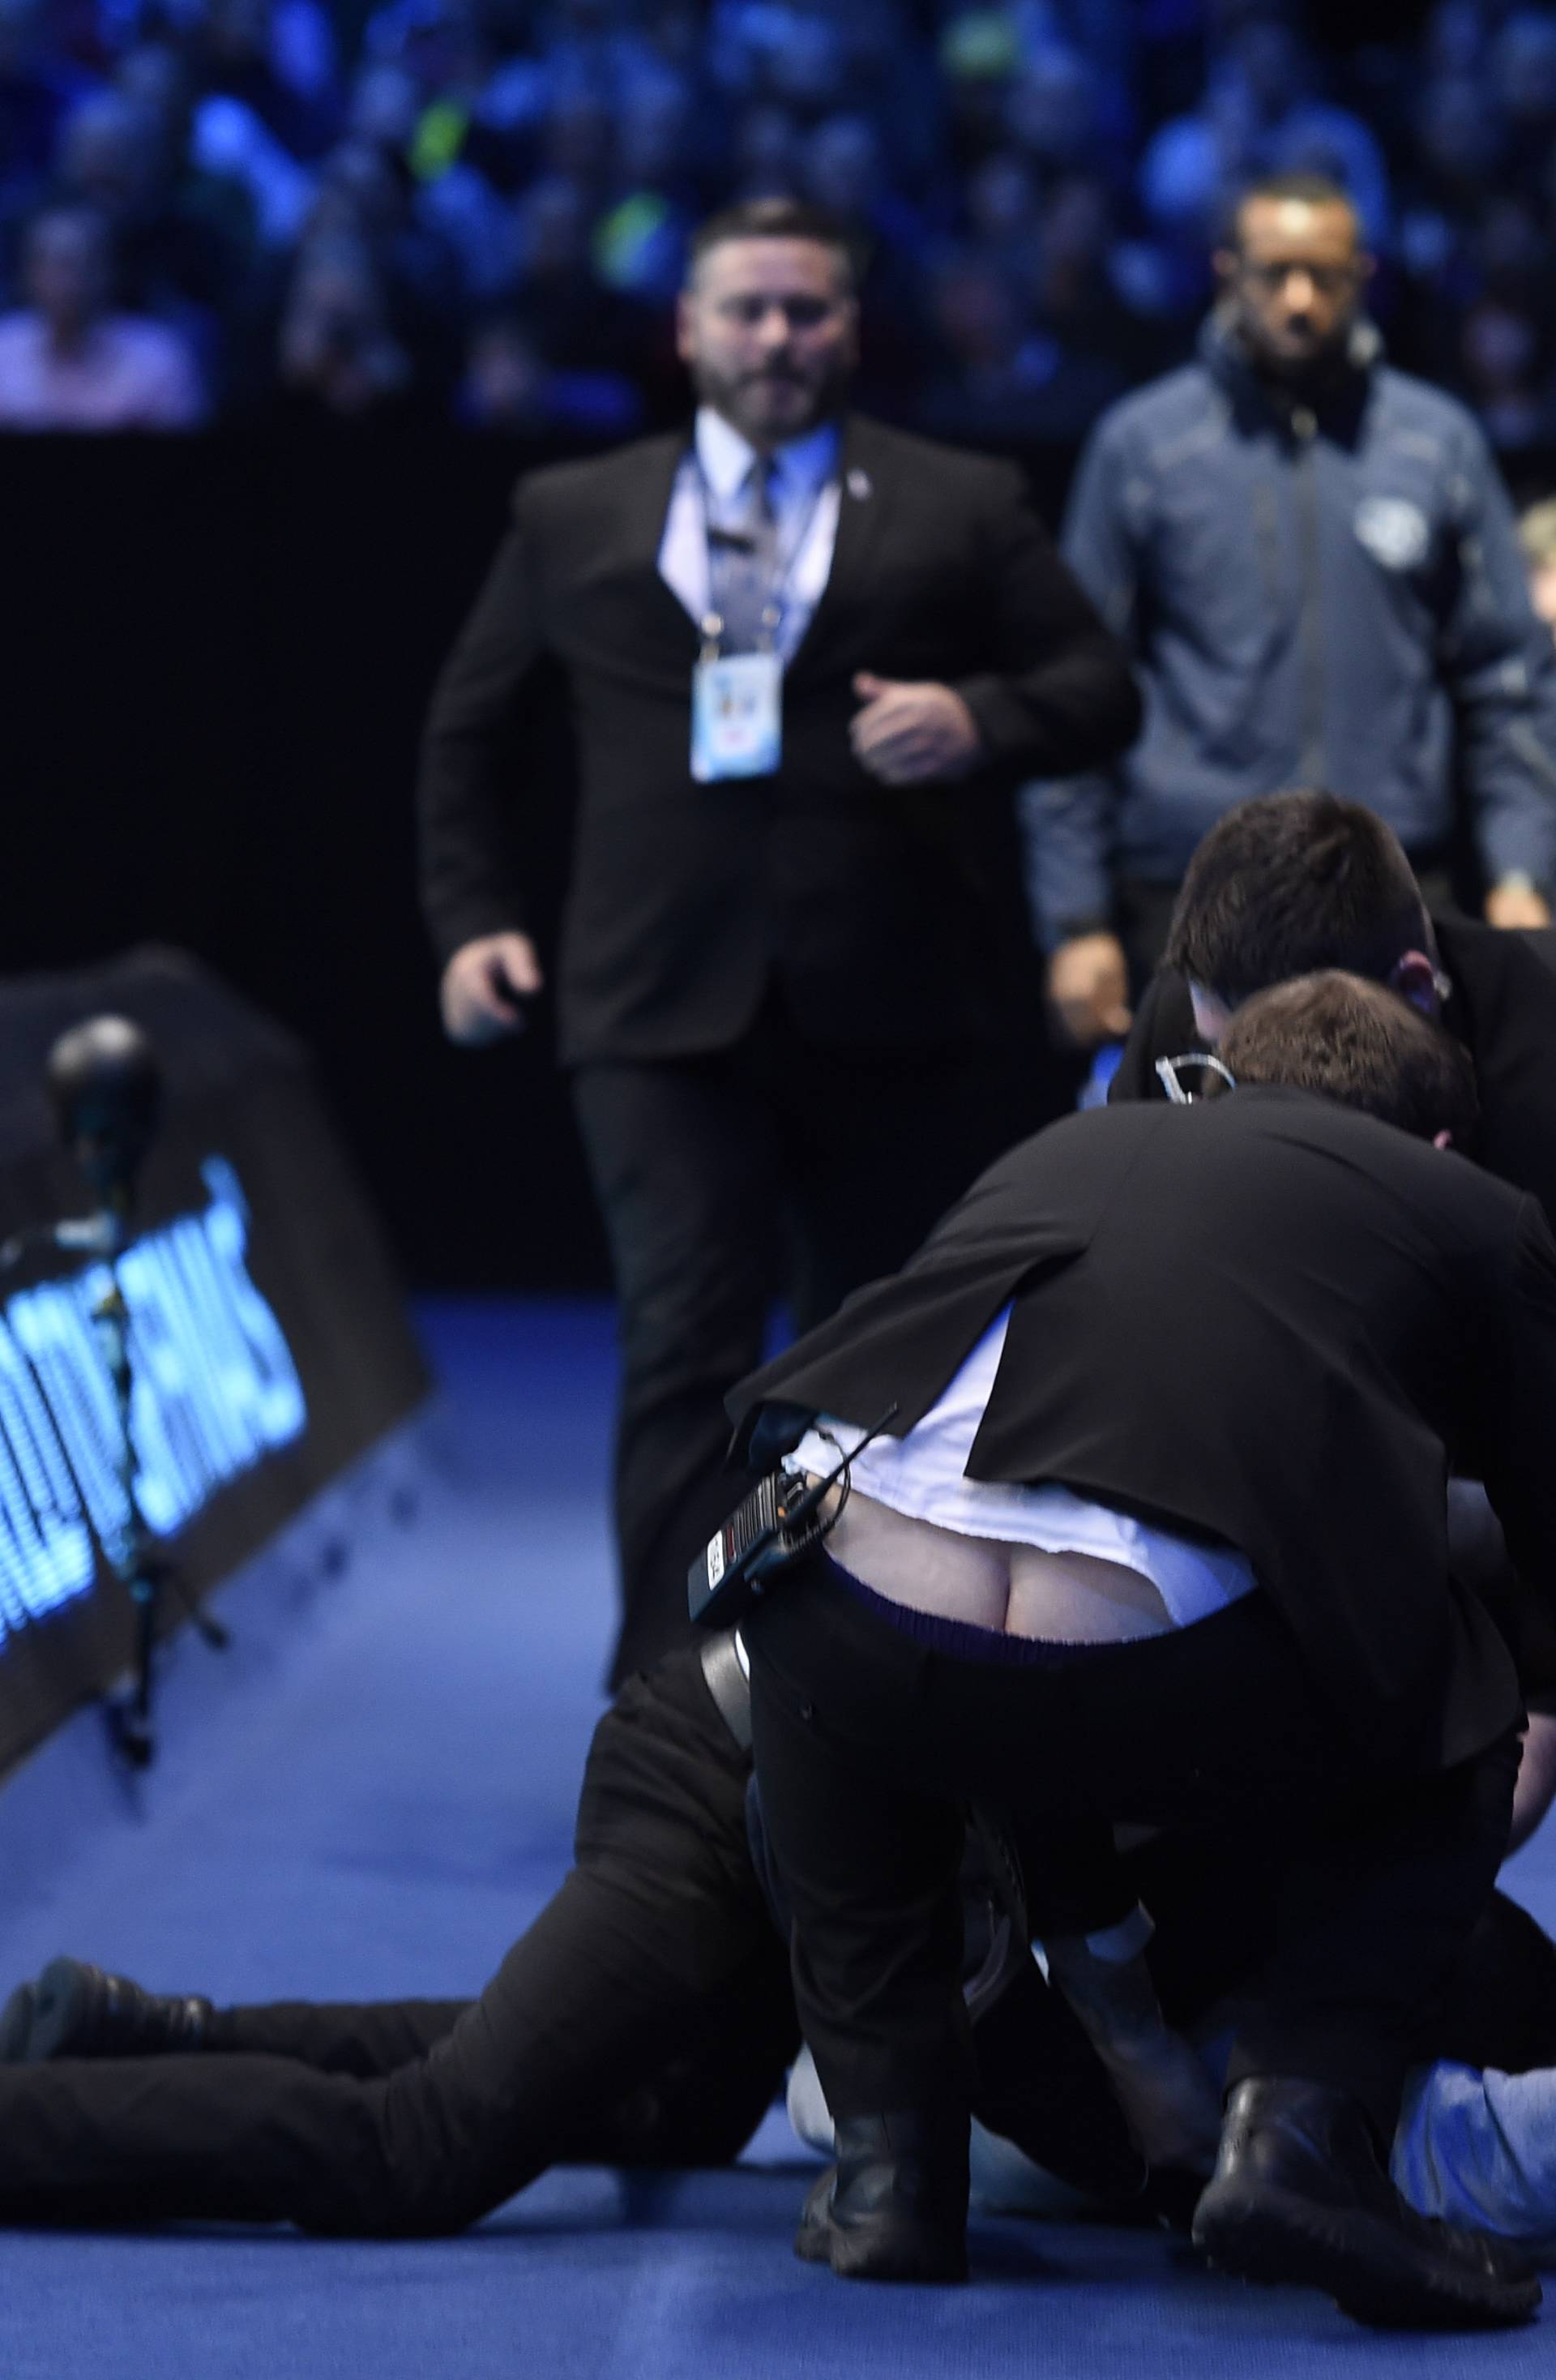 Security apprehend a spectator that attempted to invade the court during the semi final match between Japan's Kei Nishikori and Serbia's Novak Djokovic